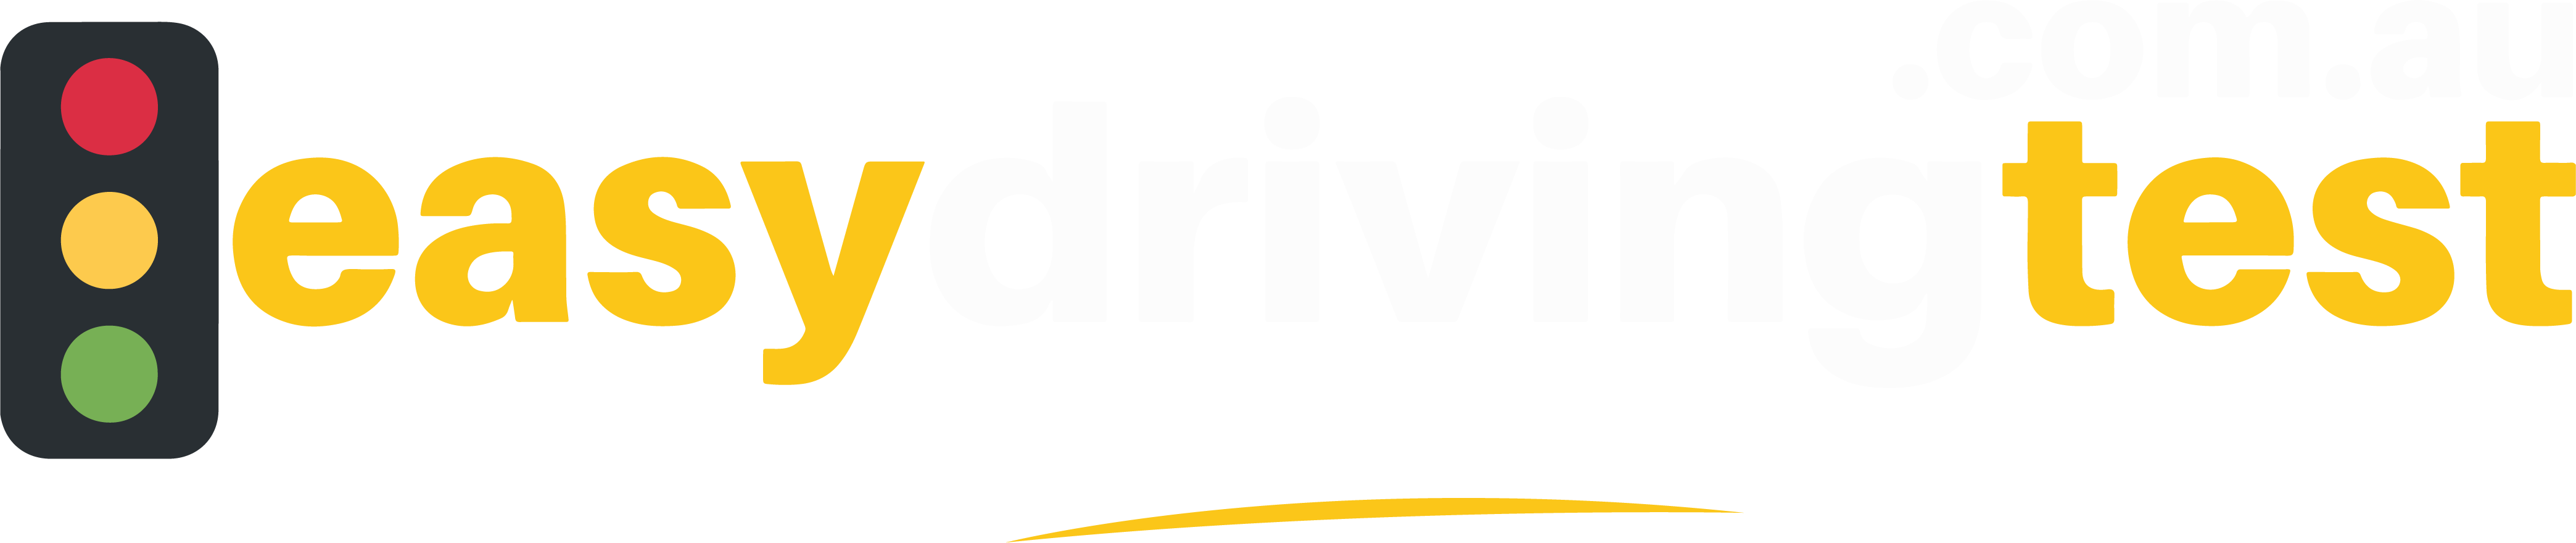 liverpool service nsw driving test route